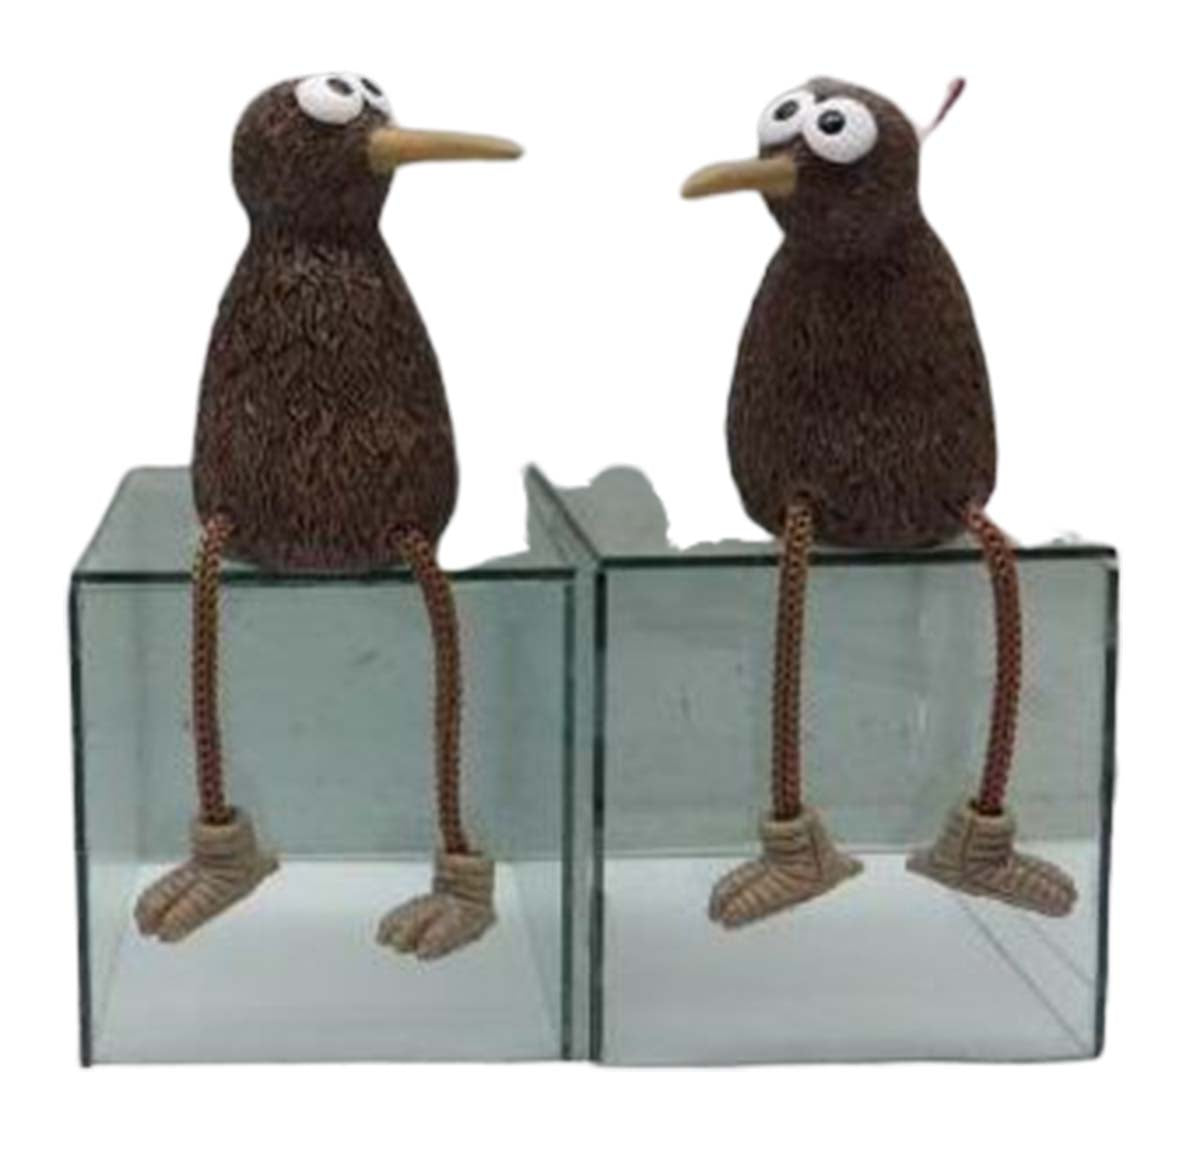 Pair Of Kiwis With Dangling Legs - Poly Resin | Small Decor | Home Decor